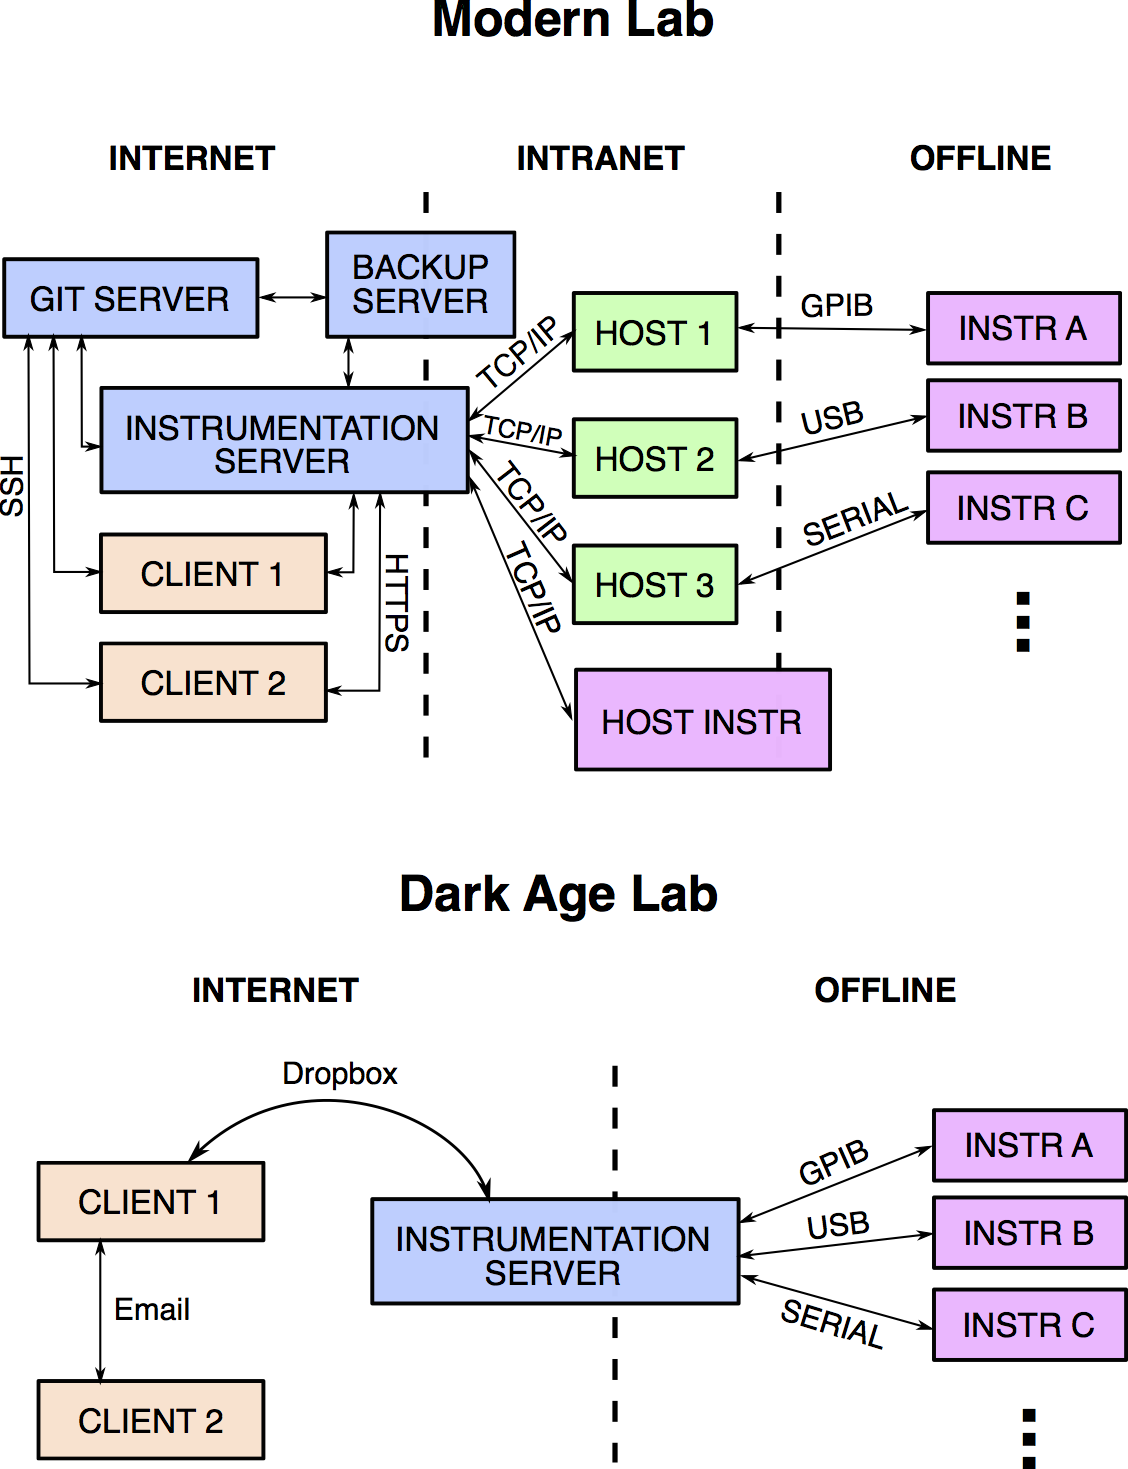 Physical infrastructure of the Modern Lab vs. Dark Age Lab. The Dark Age lab still works well for a single client, and it is still compatible with the lightlab package. But it lacks version control and backups.